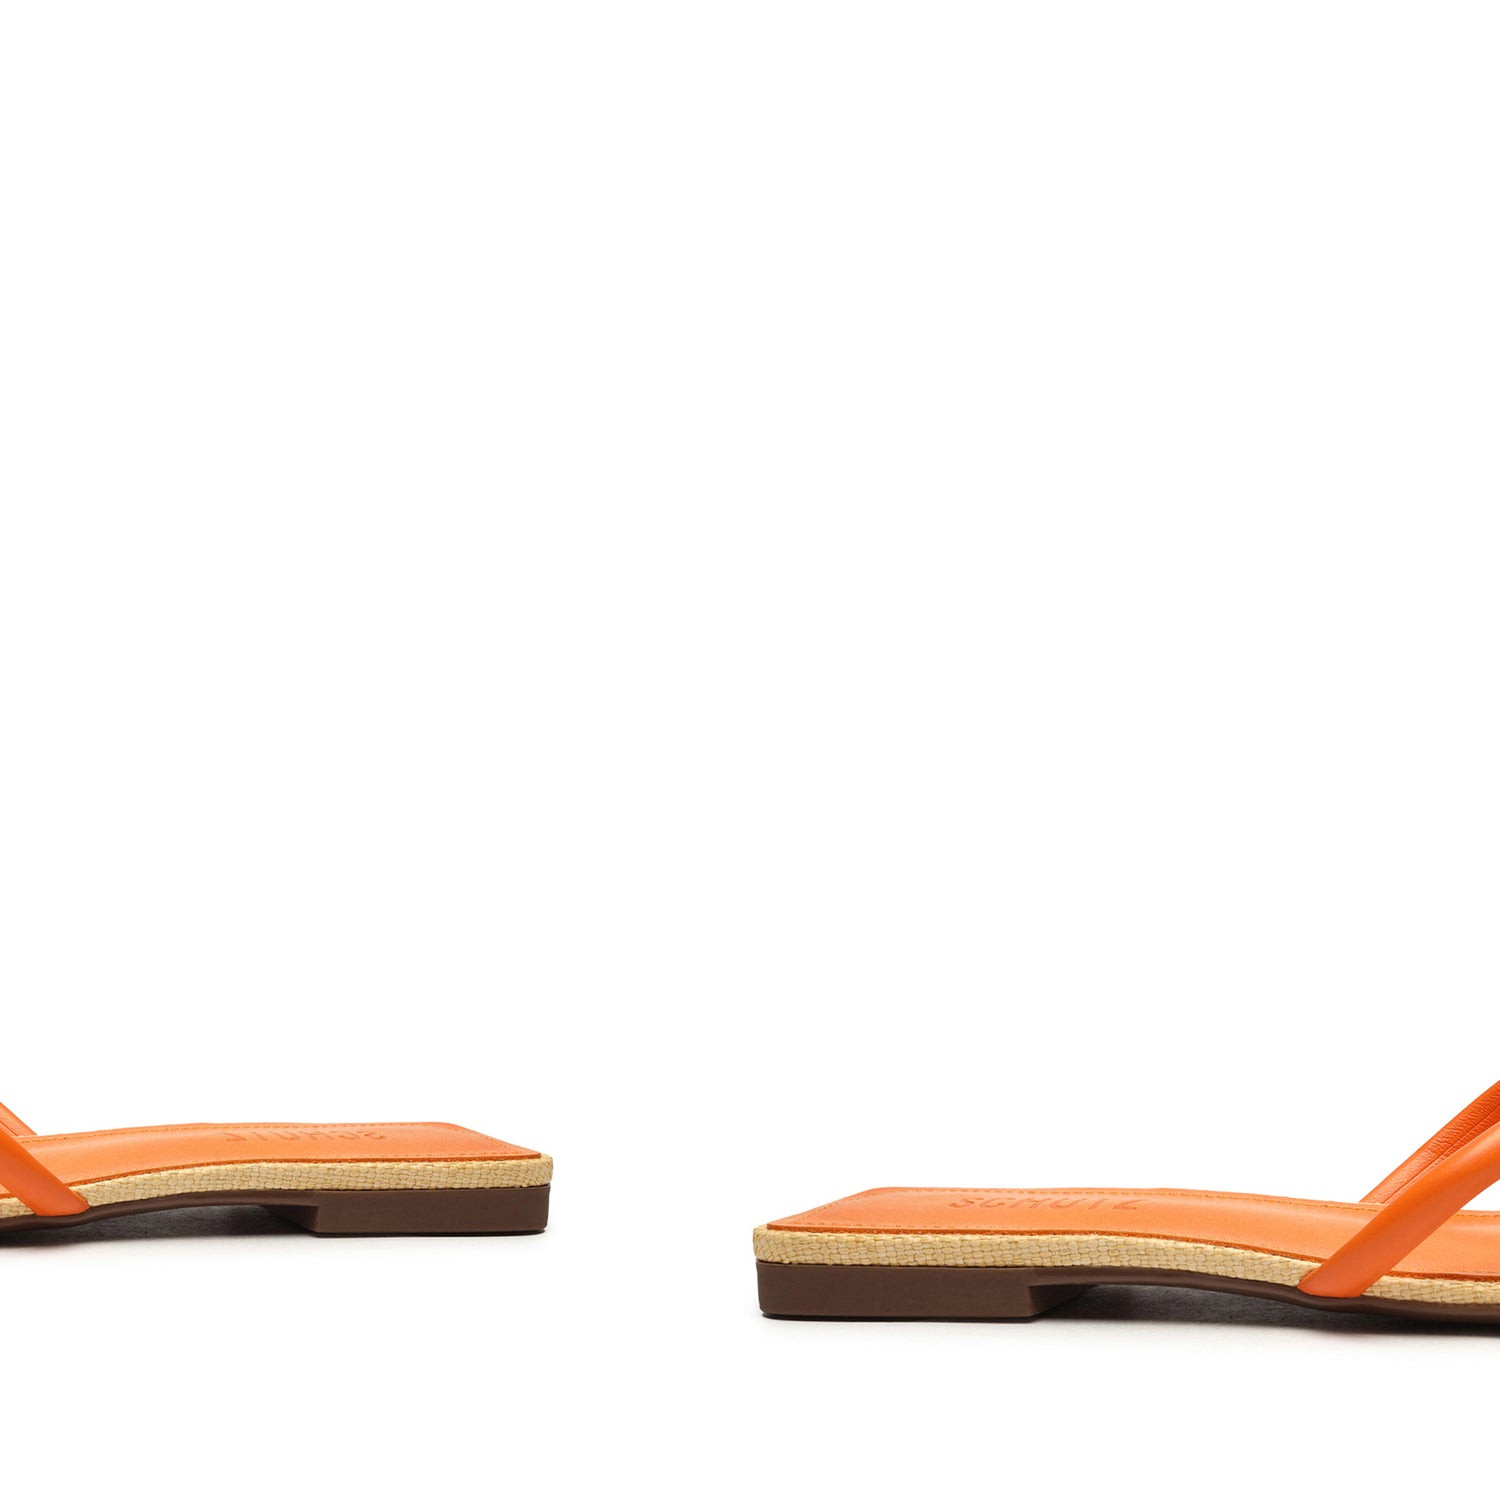 Blossom Sandal Bright Tangerine Faux Leather